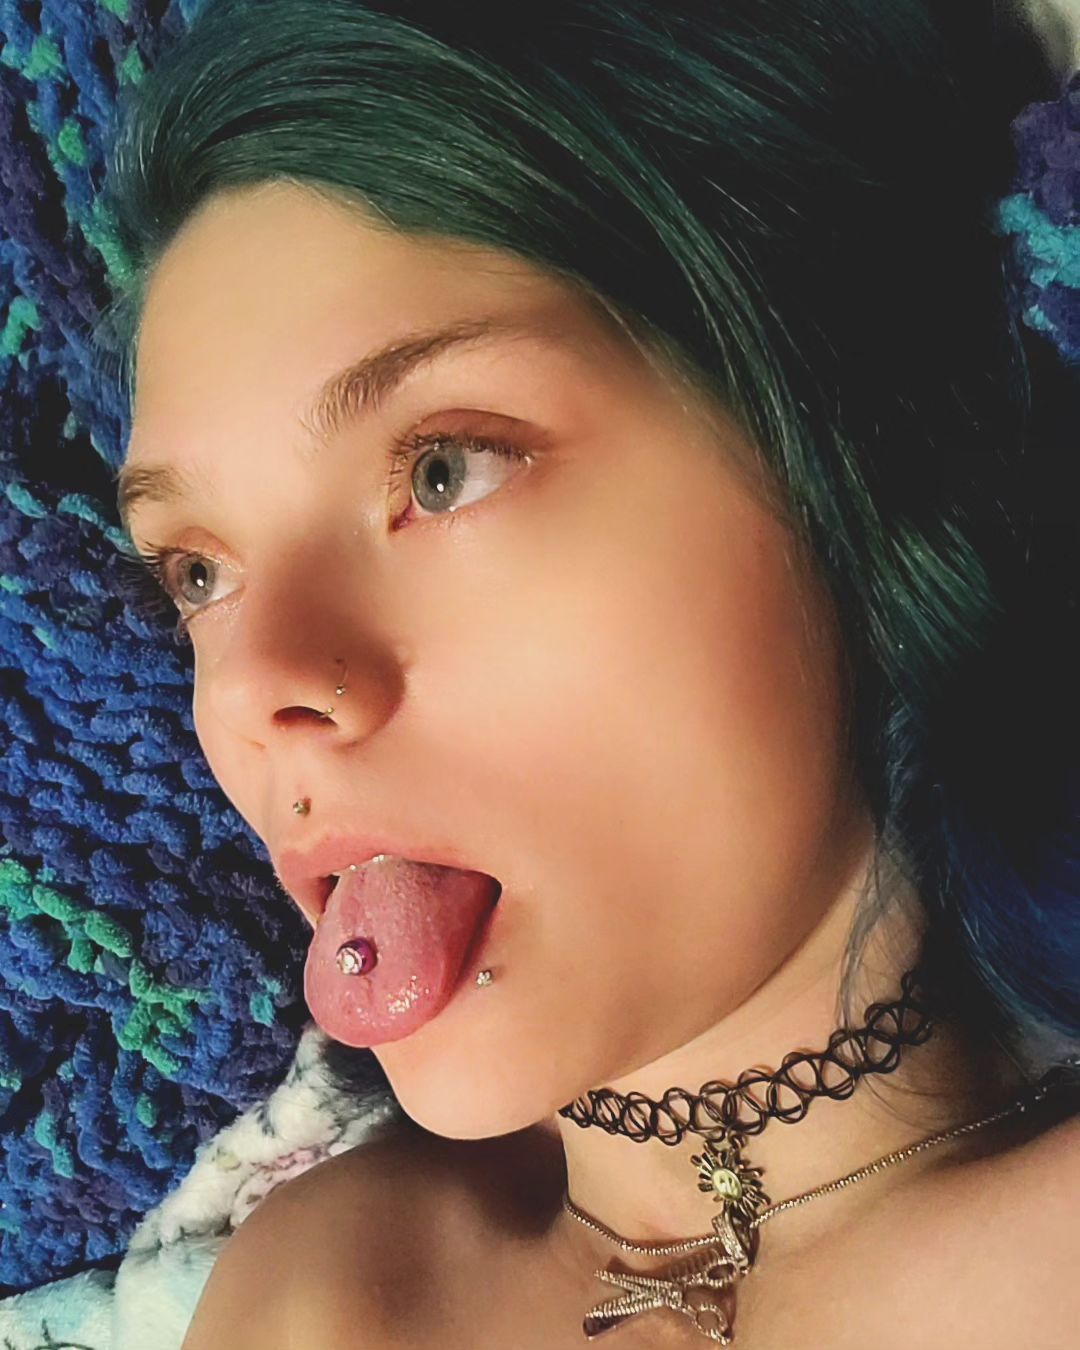 I match the blanket my mom knitted me 🥹💙💚💜